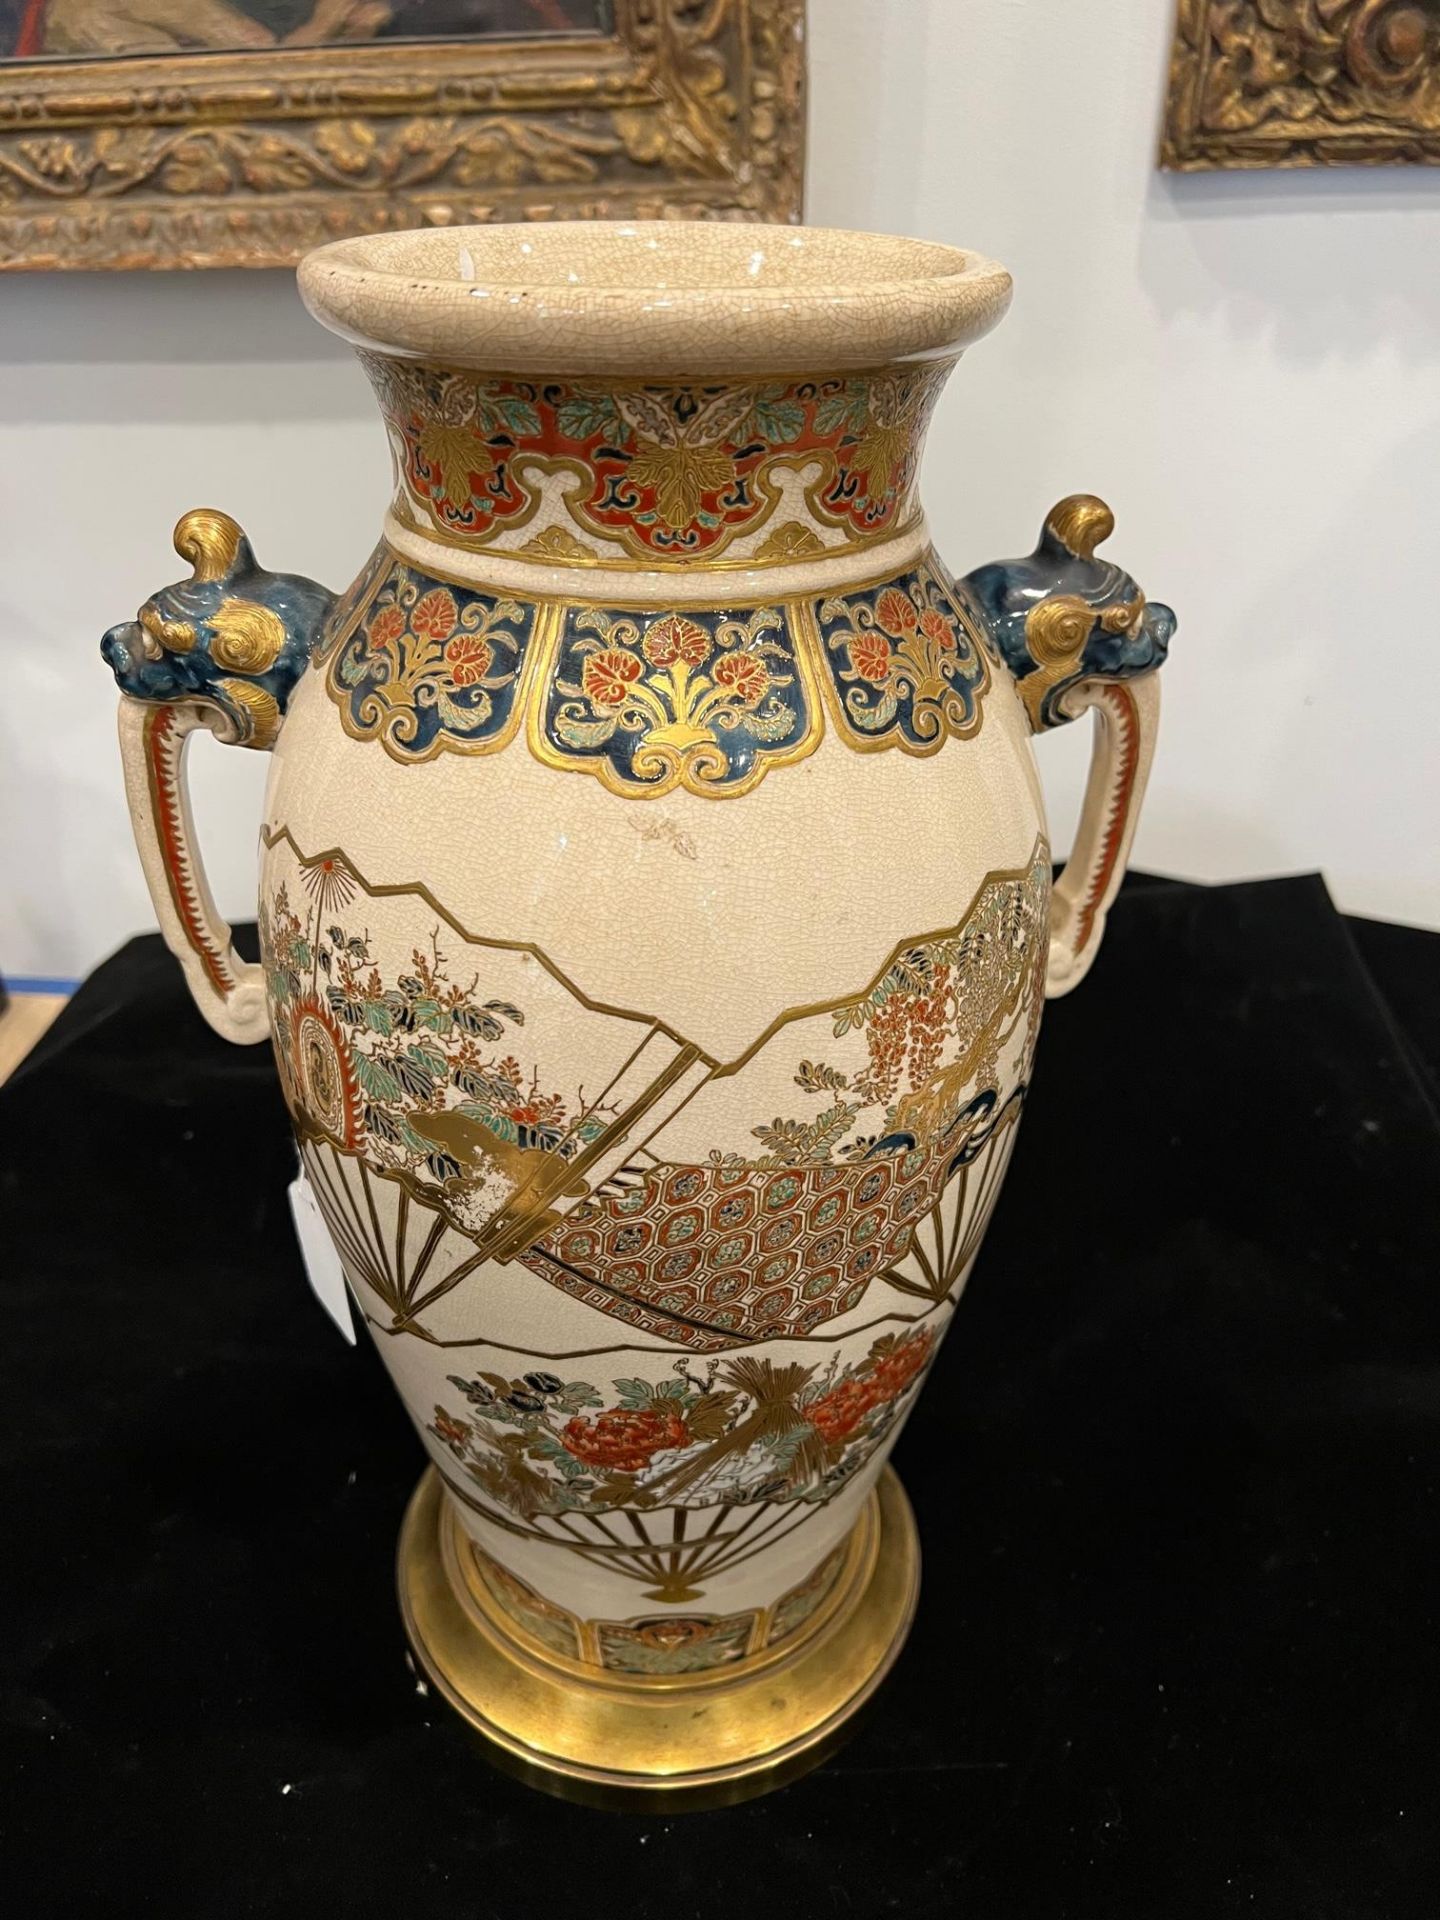 A JAPANESE IMPERIAL PERIOD SATSUMA VASE - Image 11 of 13